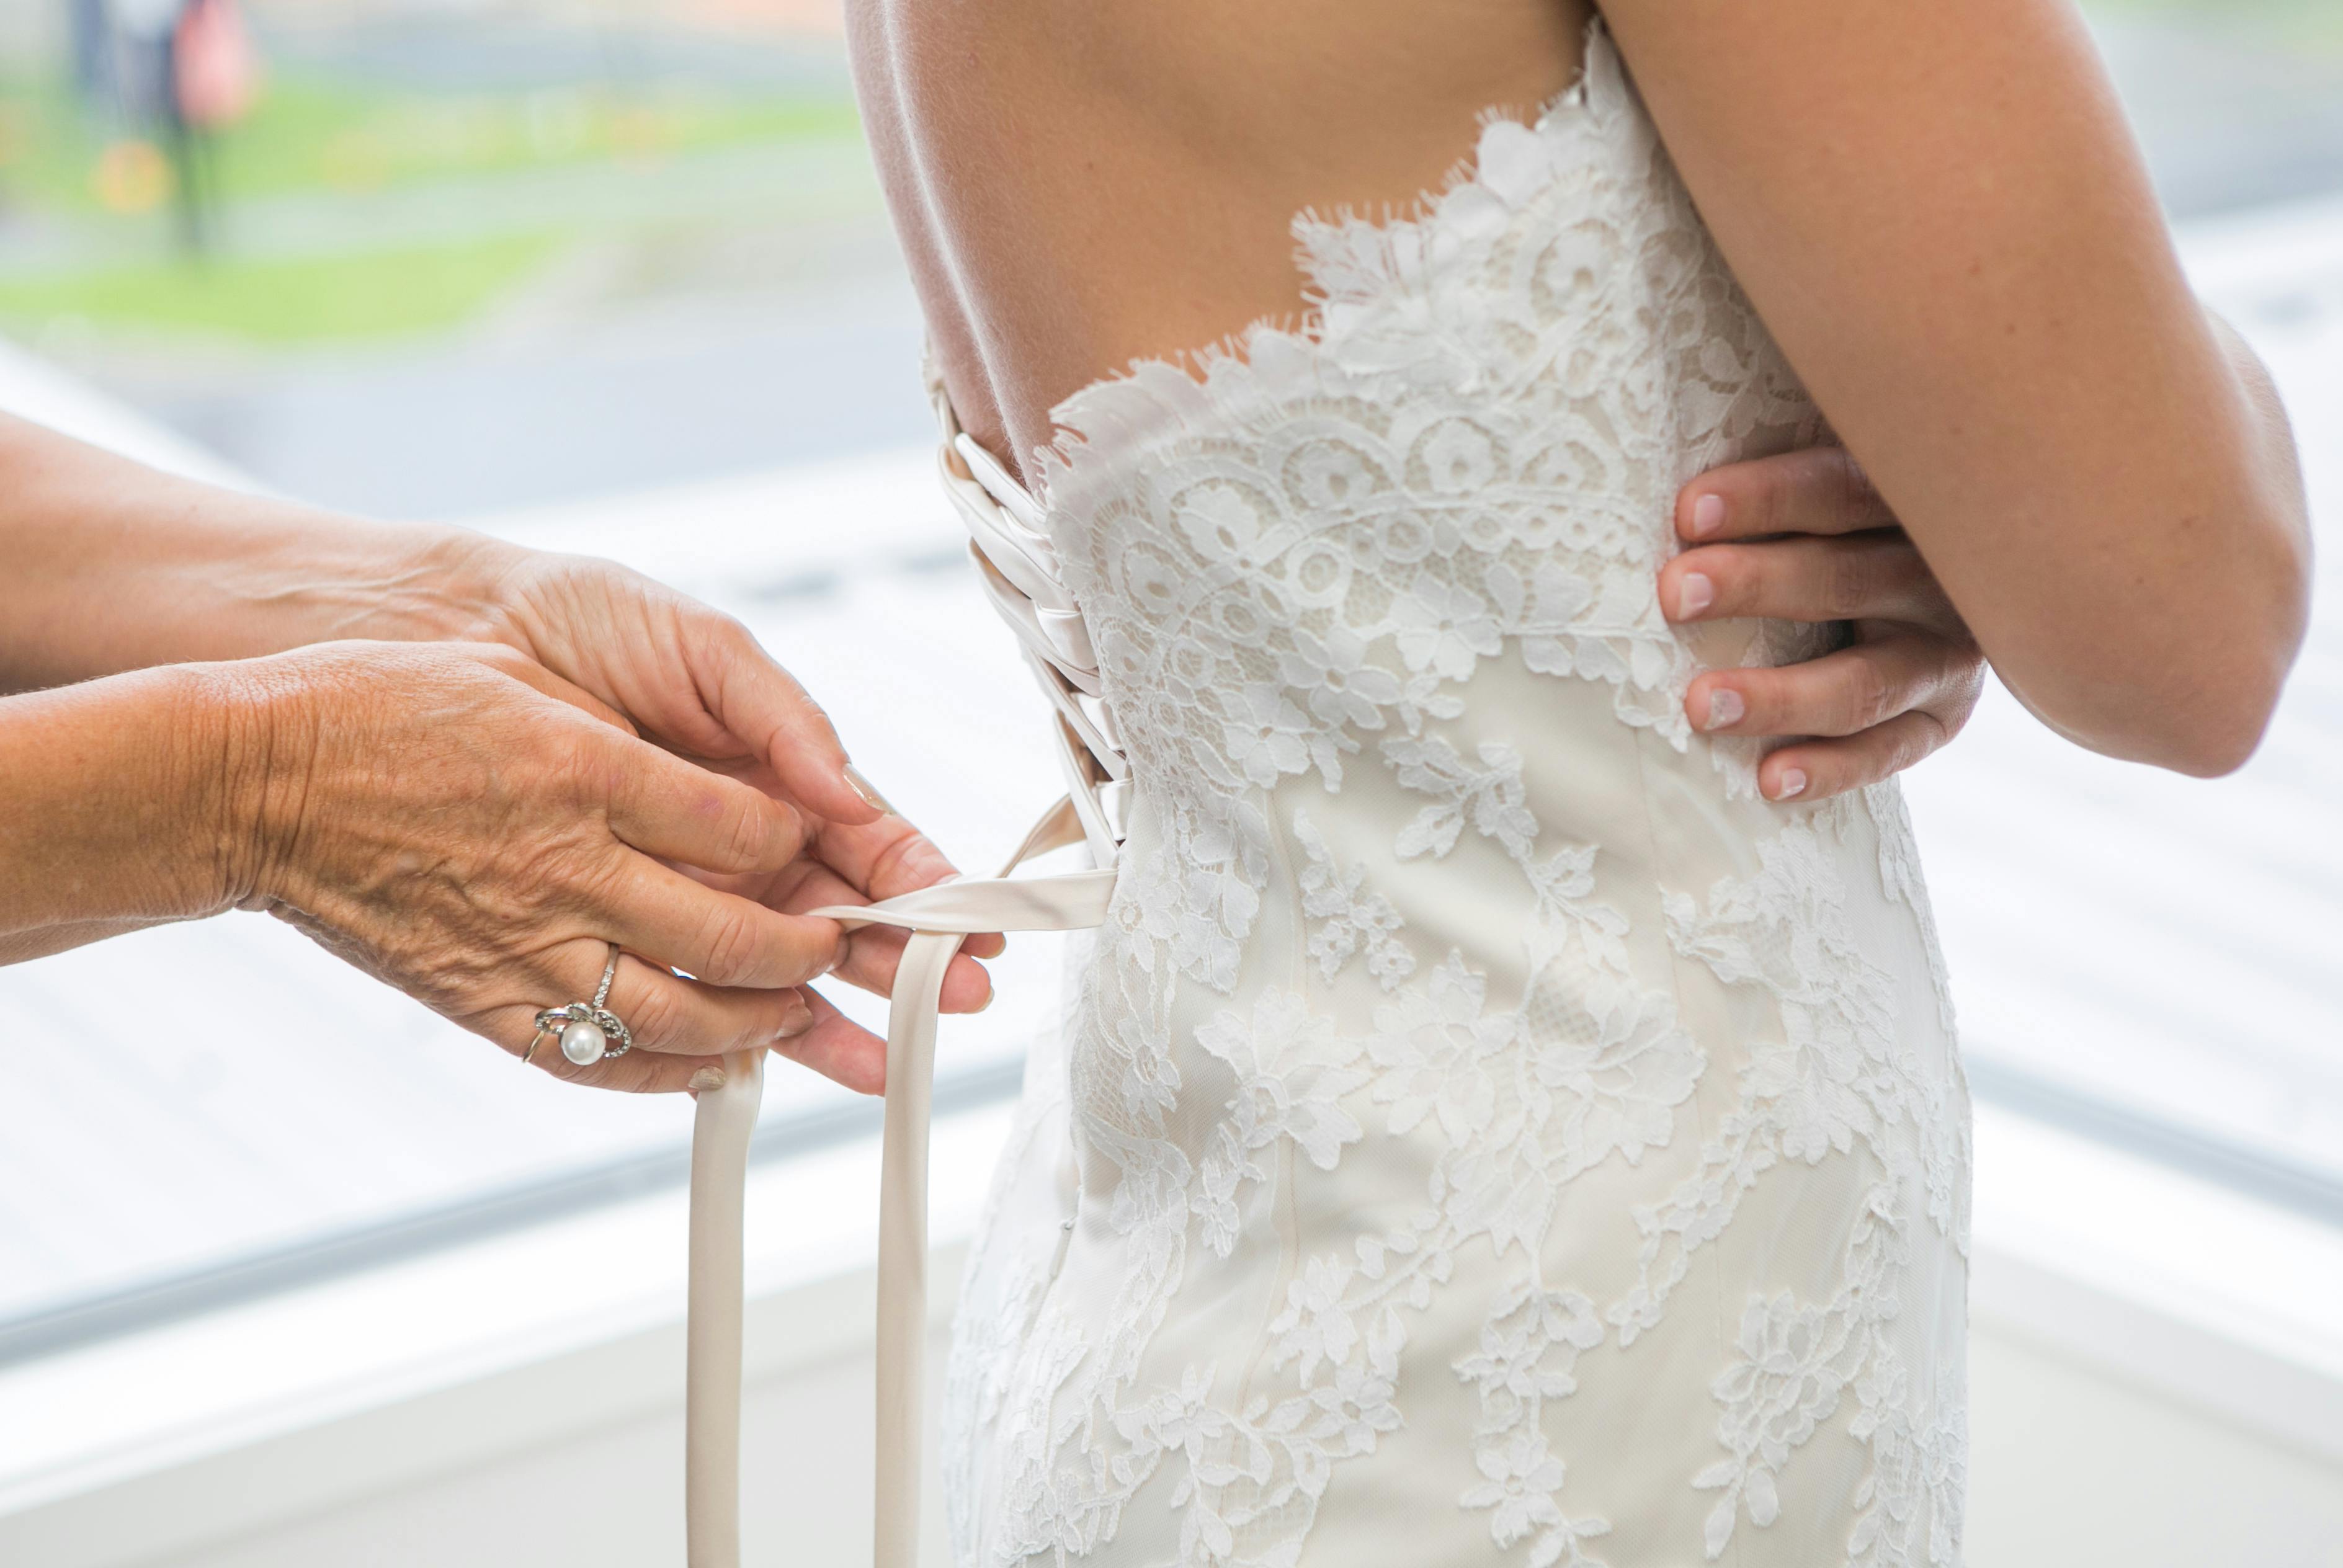 An older woman helps another undress | Source: Pexels